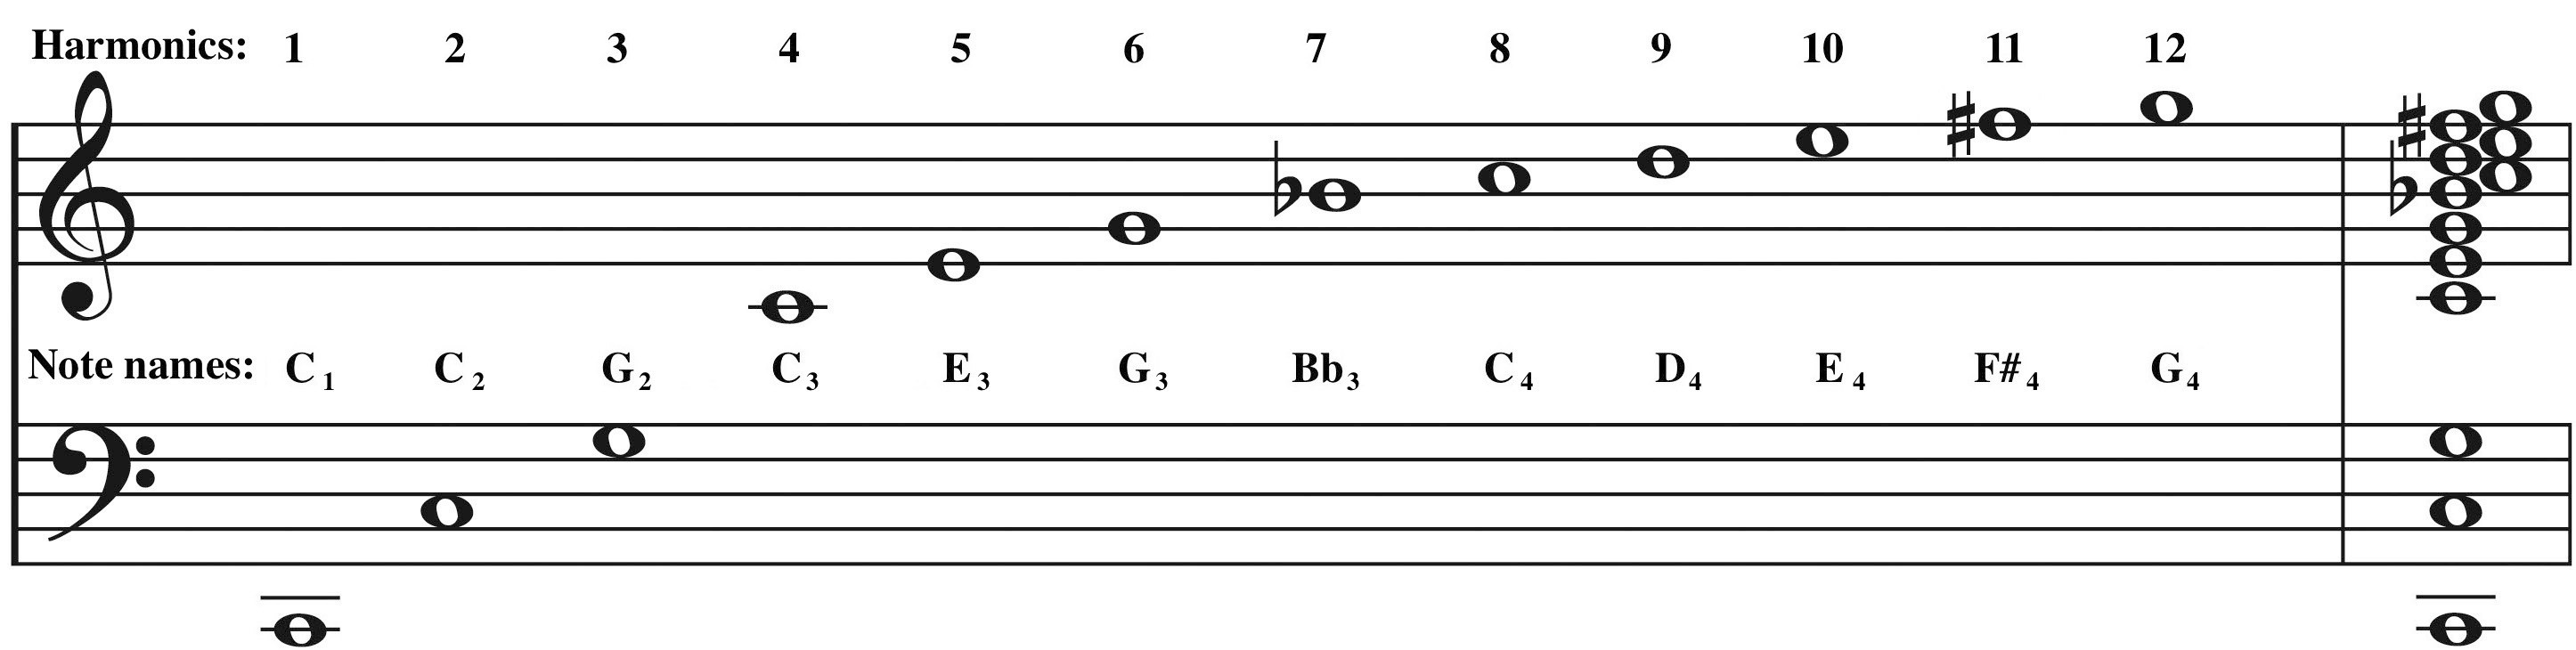 An approximation of the harmonic series on a musical staff